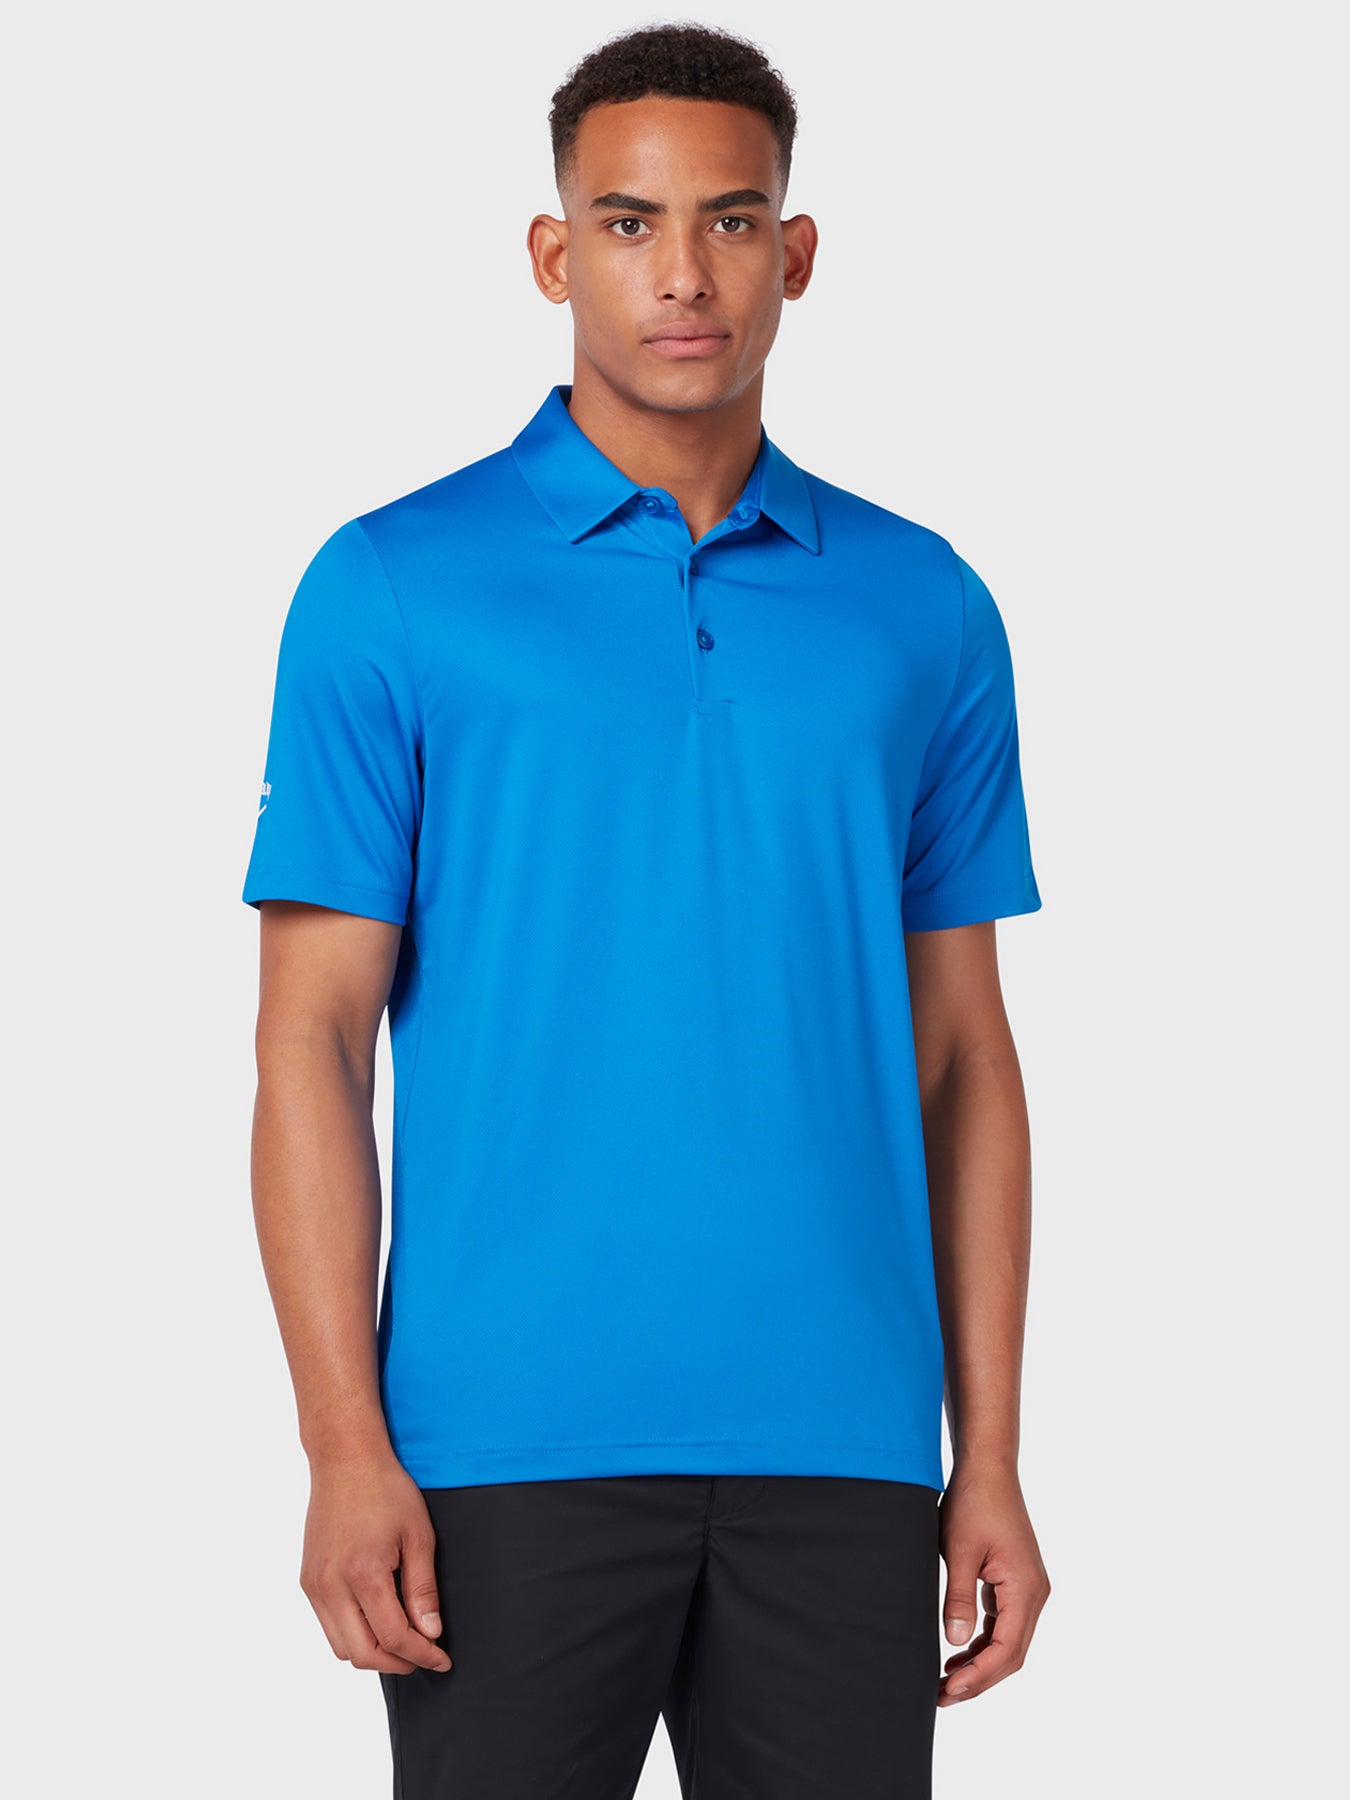 View Swing Tech Tour Polo In Magnetic Blue Magnetic Blue XXXL information